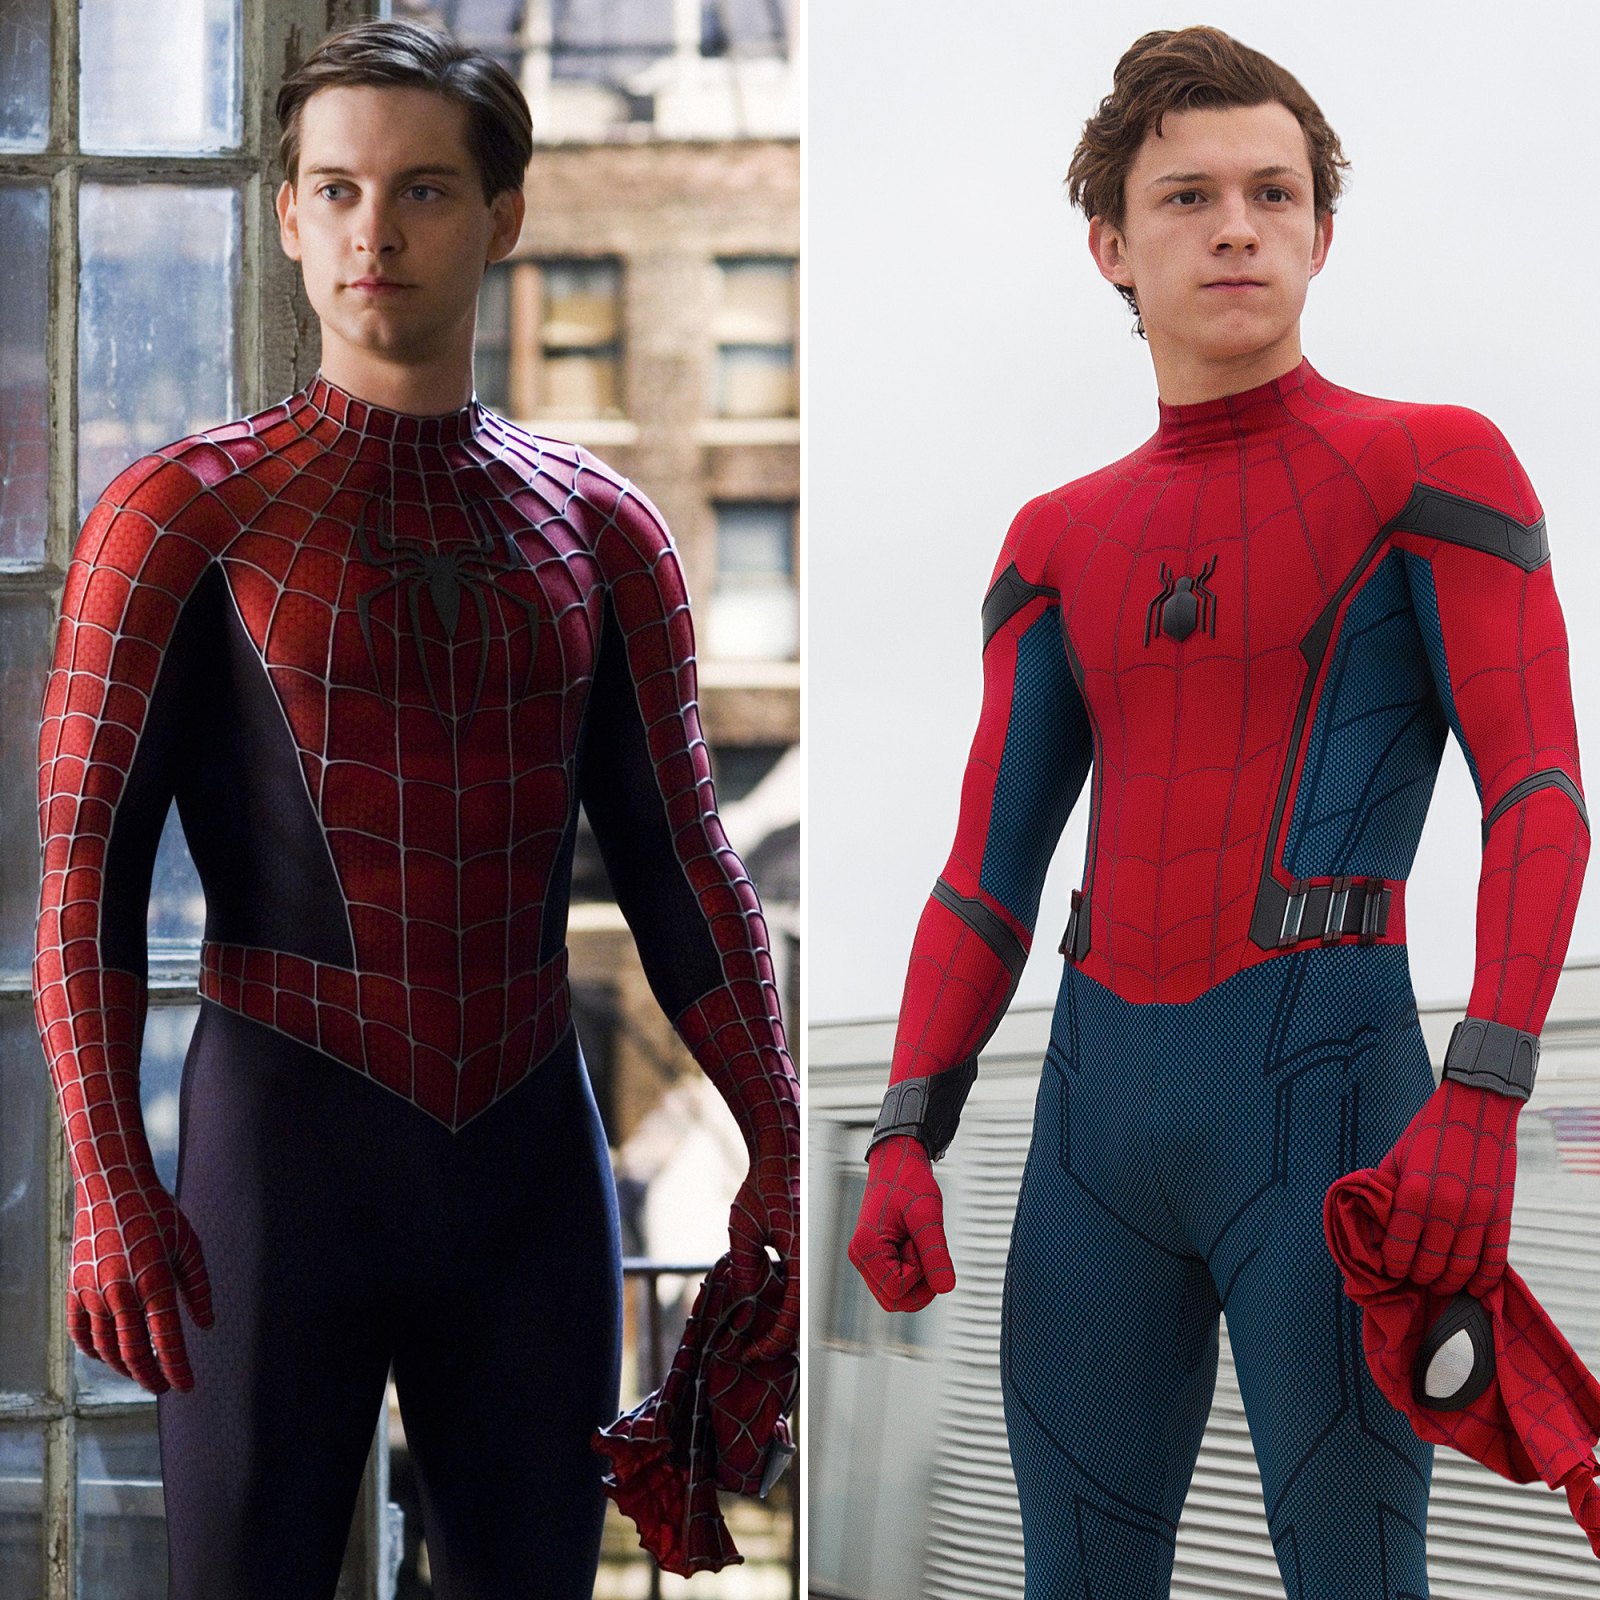 Tobey Maguire Tom Holland and More Actors Who've Portrayed Spider-Man